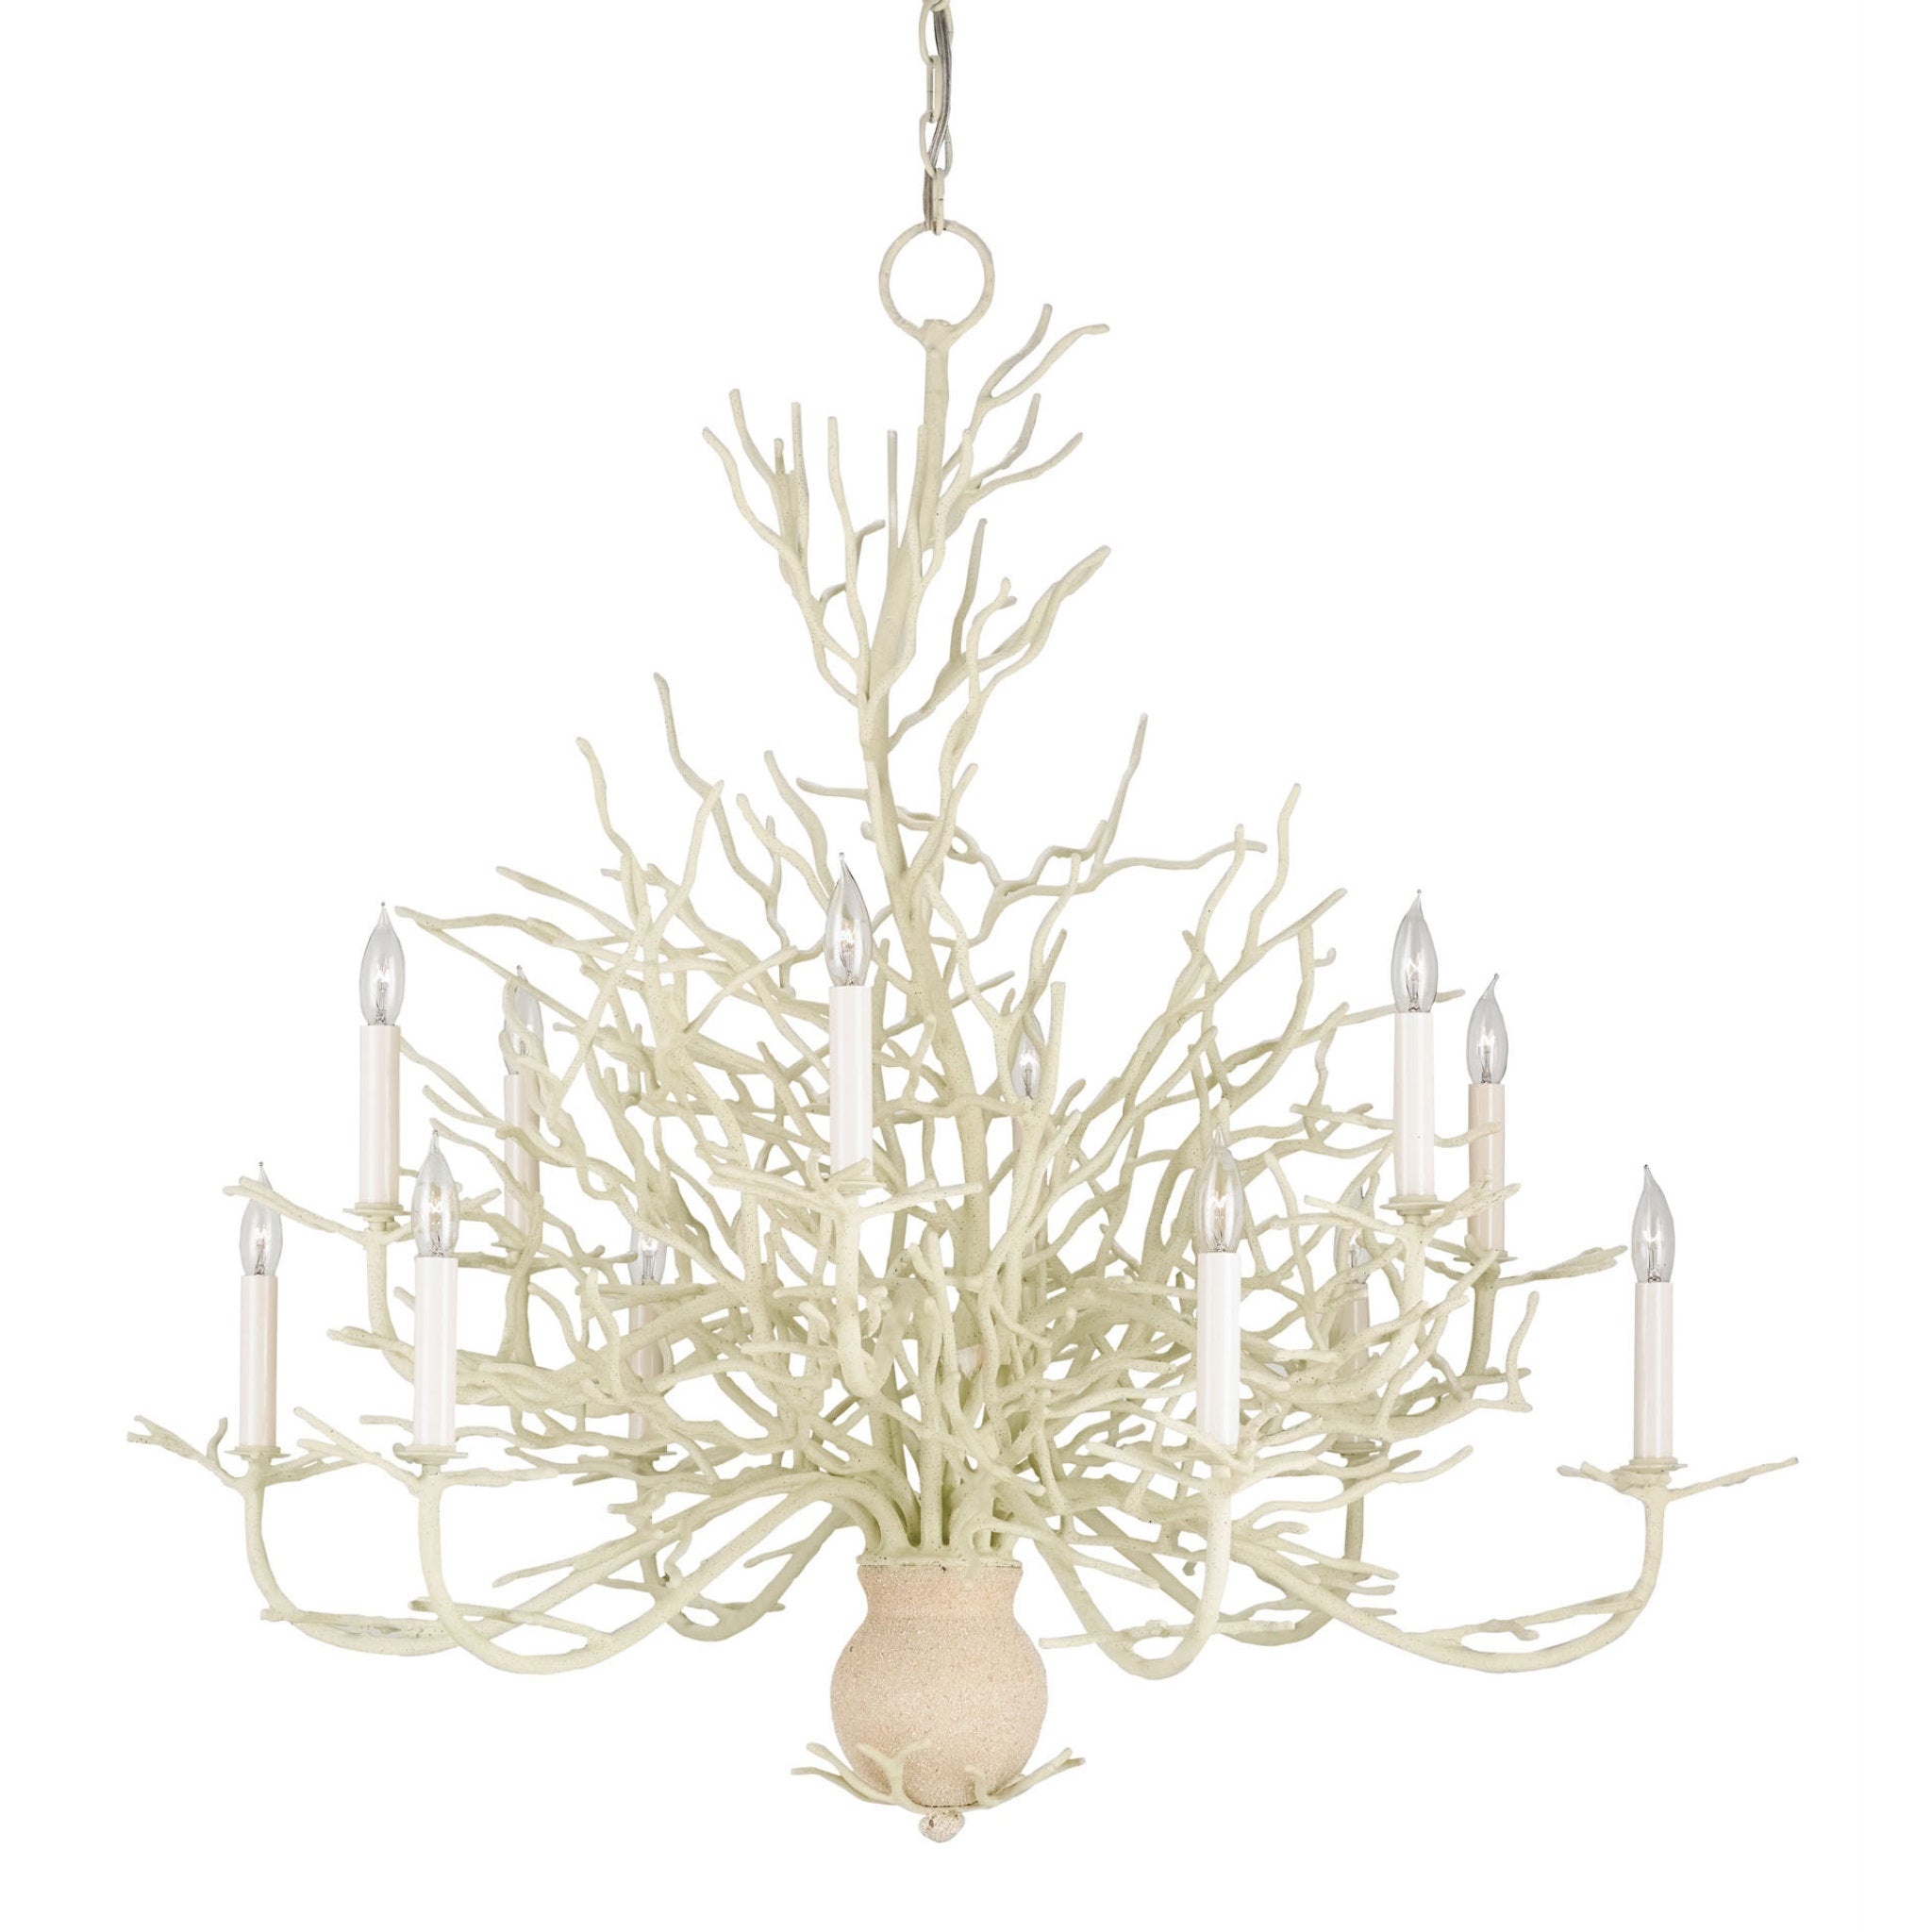 Seaward Large White Chandelier - White Coral/Natural Sand